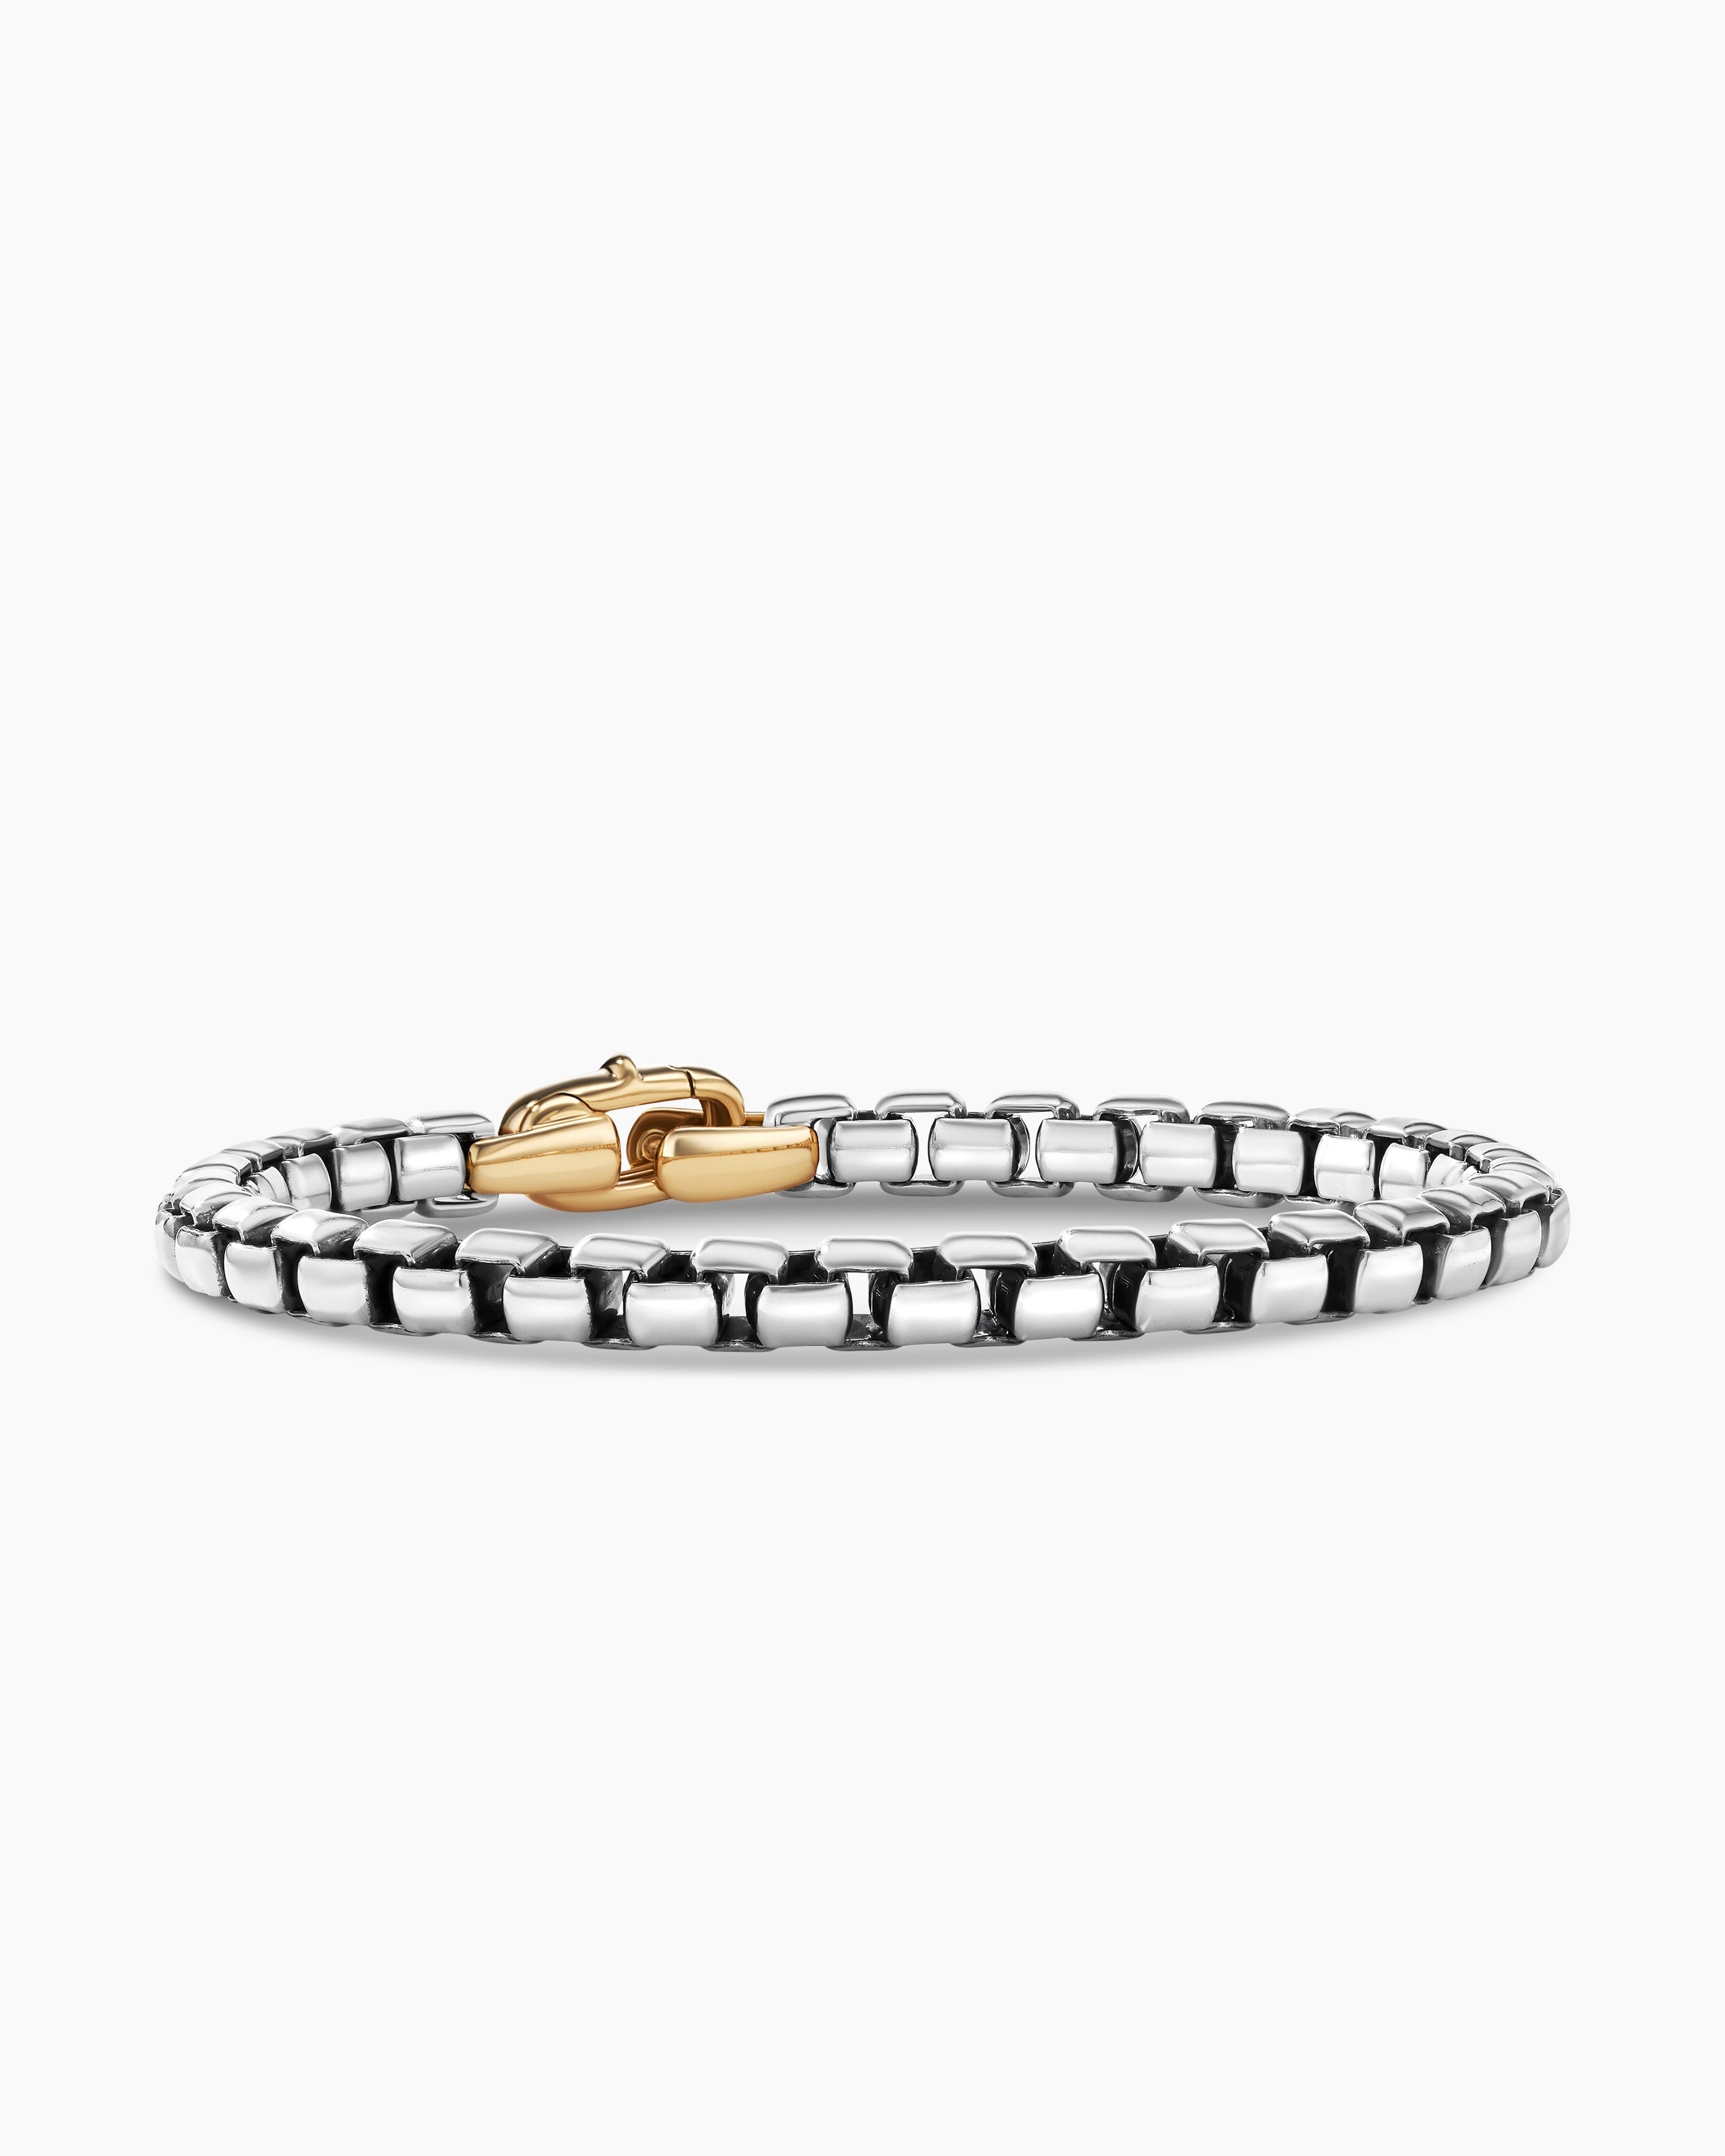 DY Bel Aire Box Chain Yurman Gold, 6mm with Yellow David Silver | Bracelet 14K Sterling in